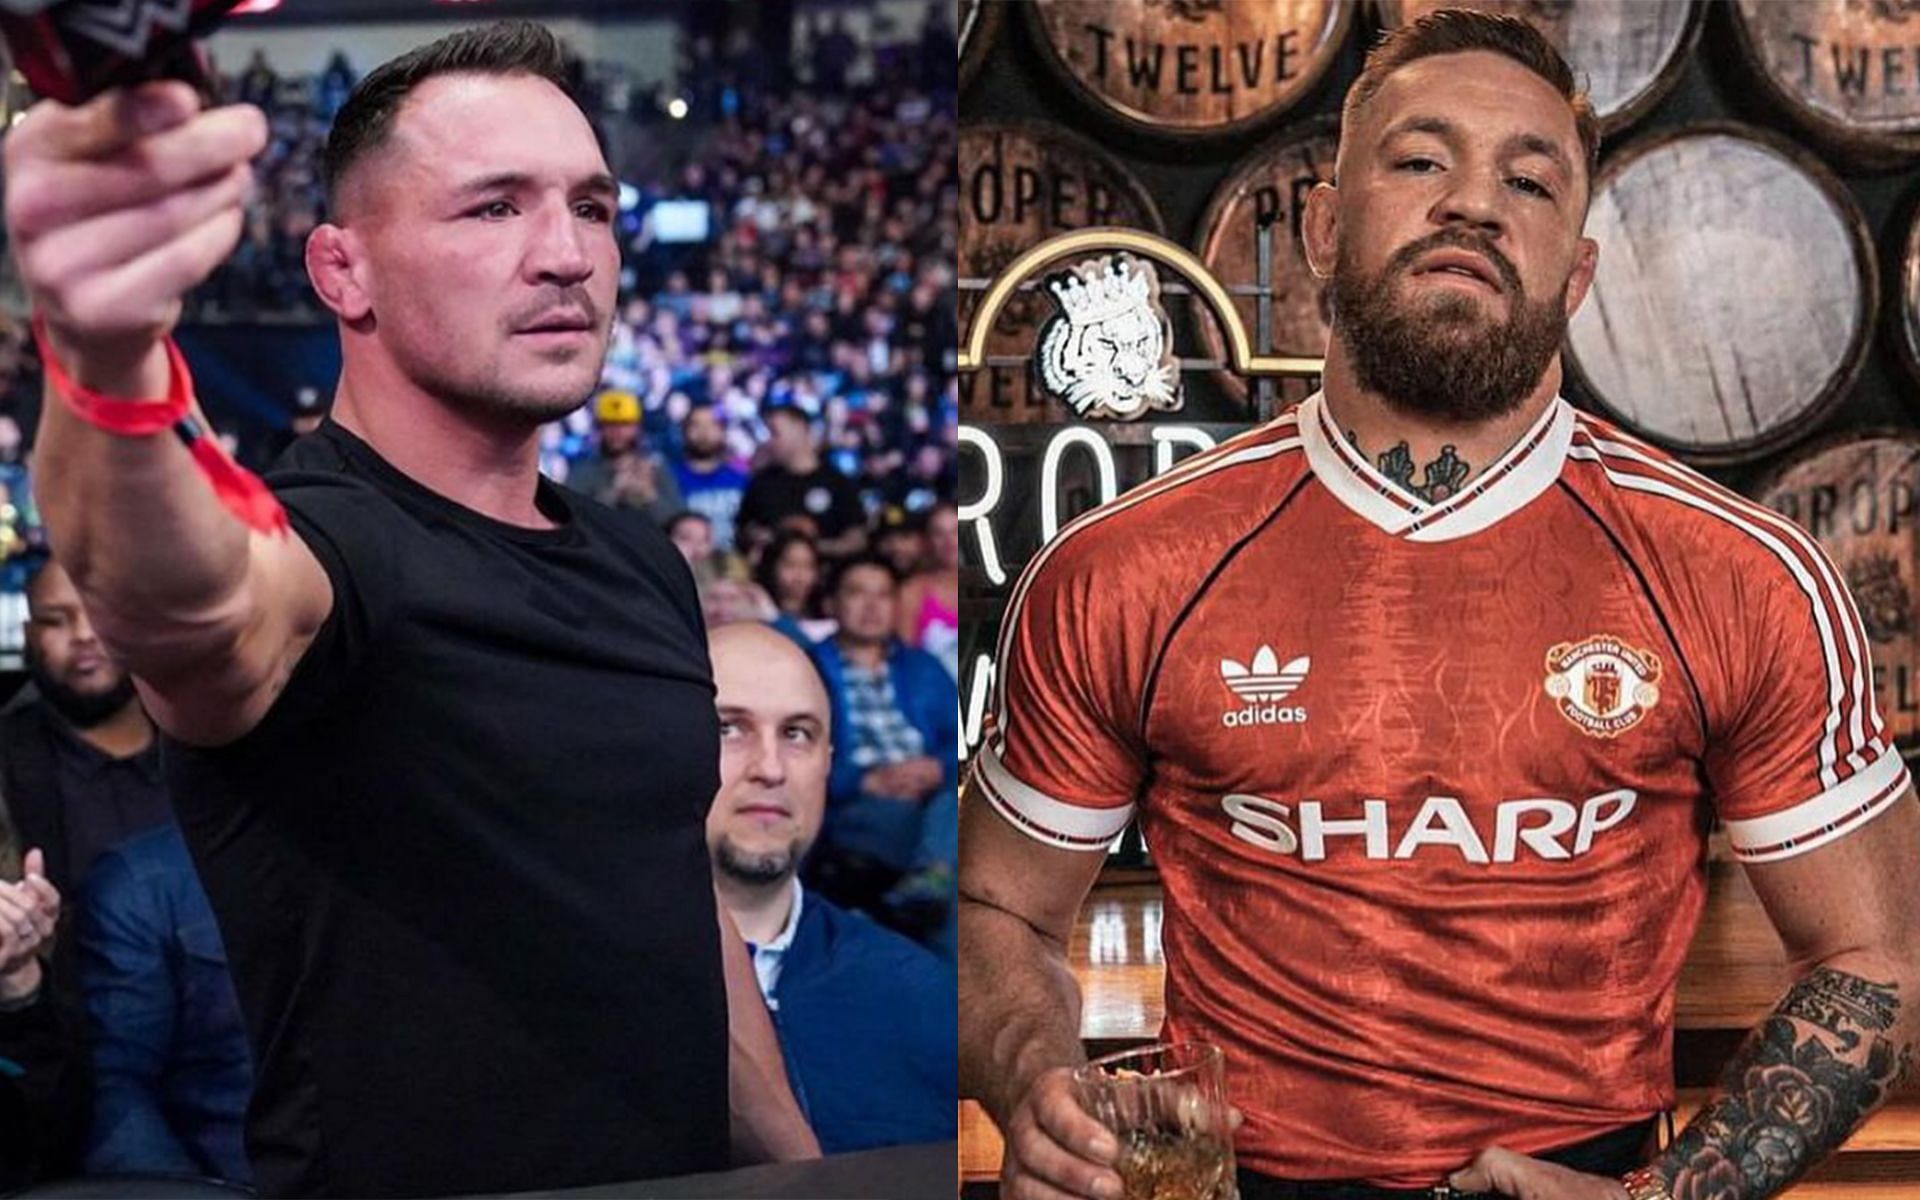 Michael Chandler (left) predicts to finish Conor McGregor (right) at UFC 303 [Images Courtesy: @mikechandlermma and @thenotoriousmma Instagram]